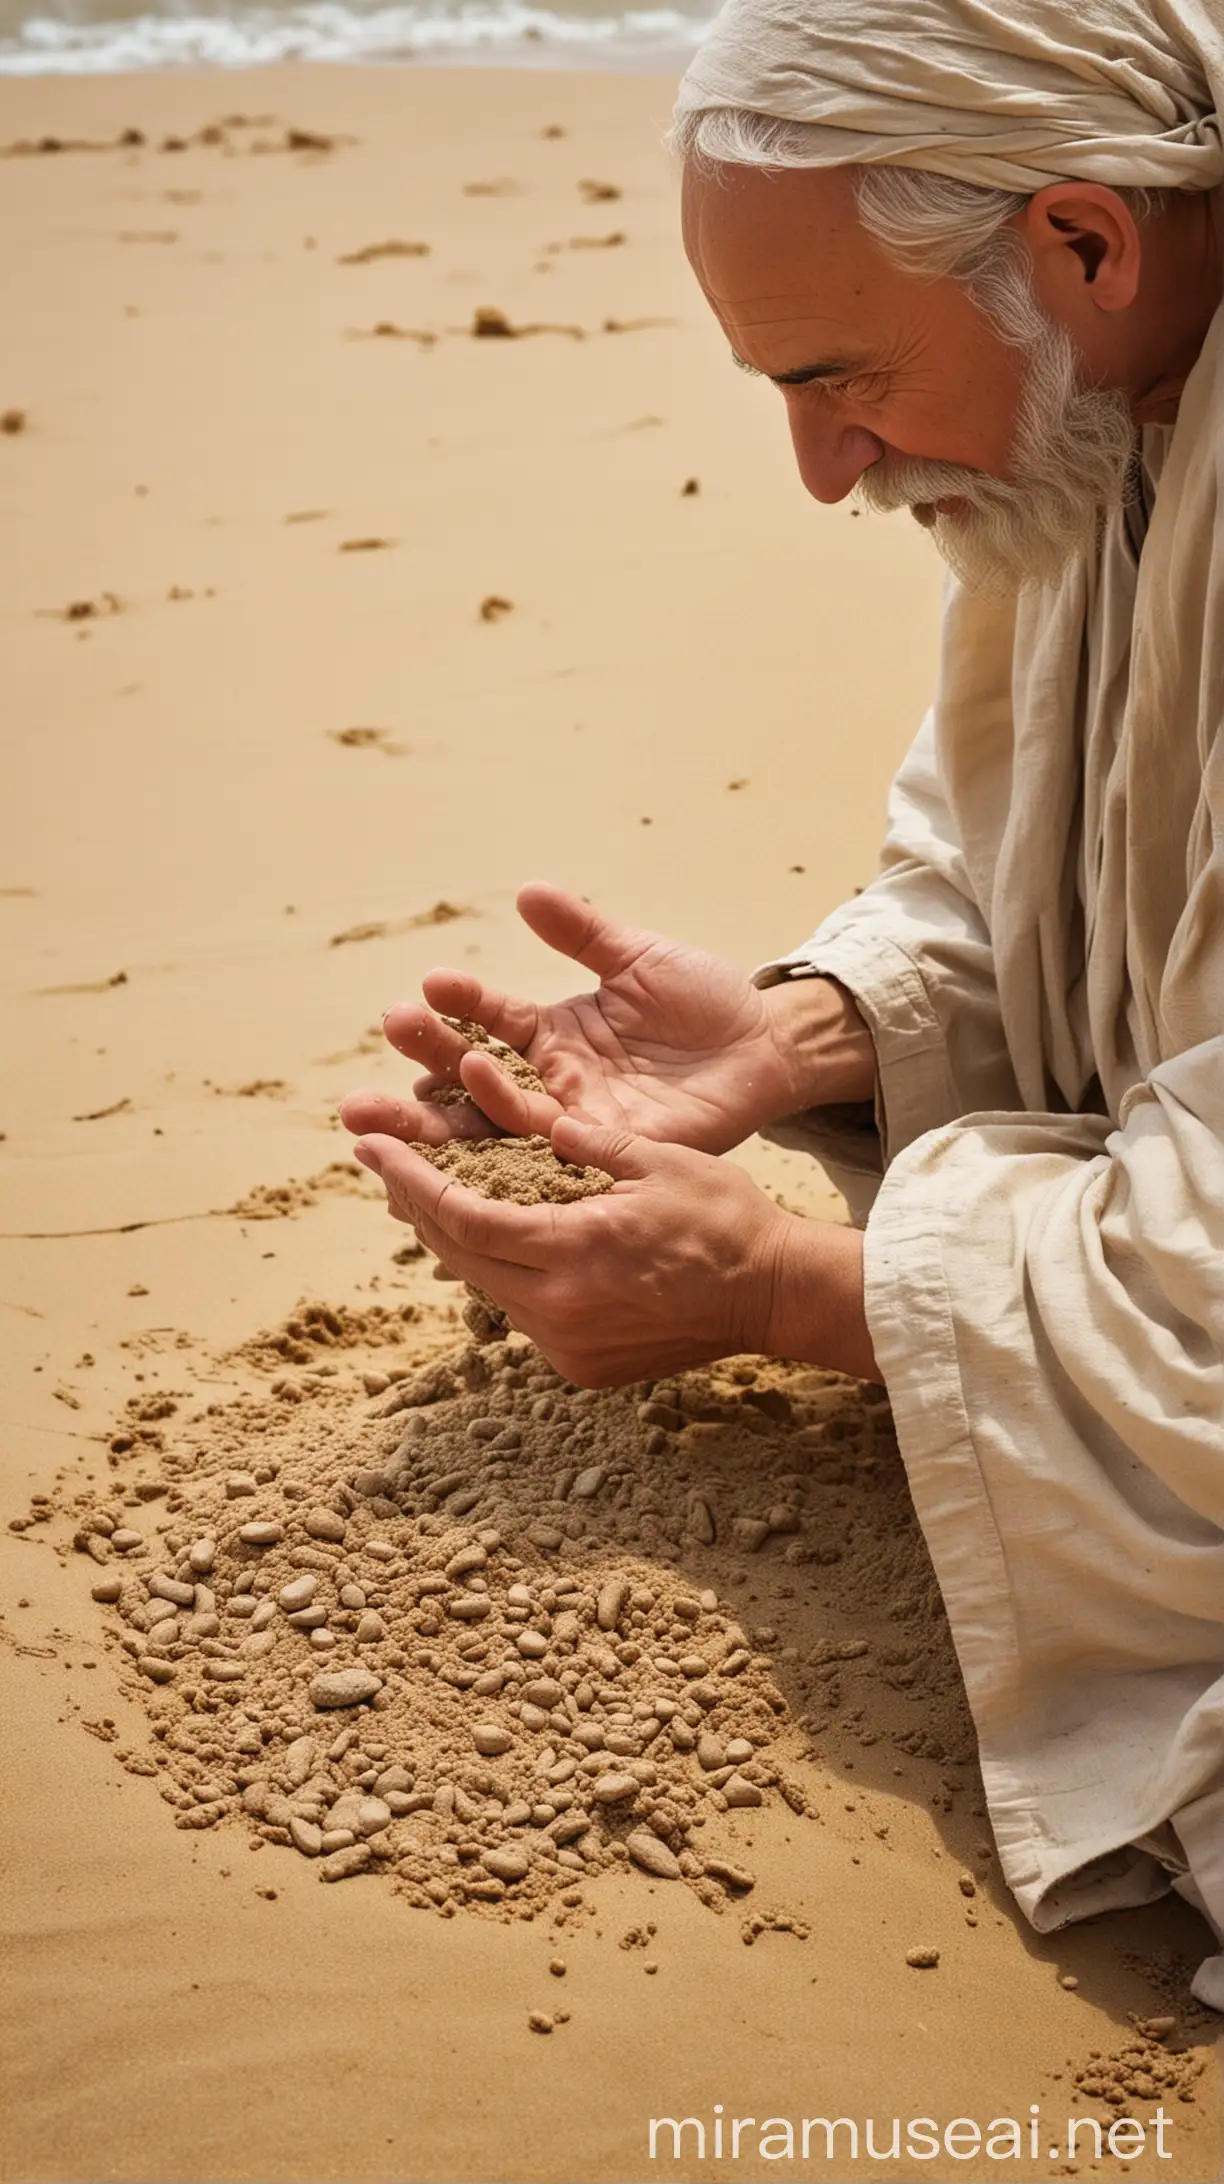 The wise man took a handful of sand and said to his disciple, "This is the whole of human life." Then he spilled some of the sand between his fingers: